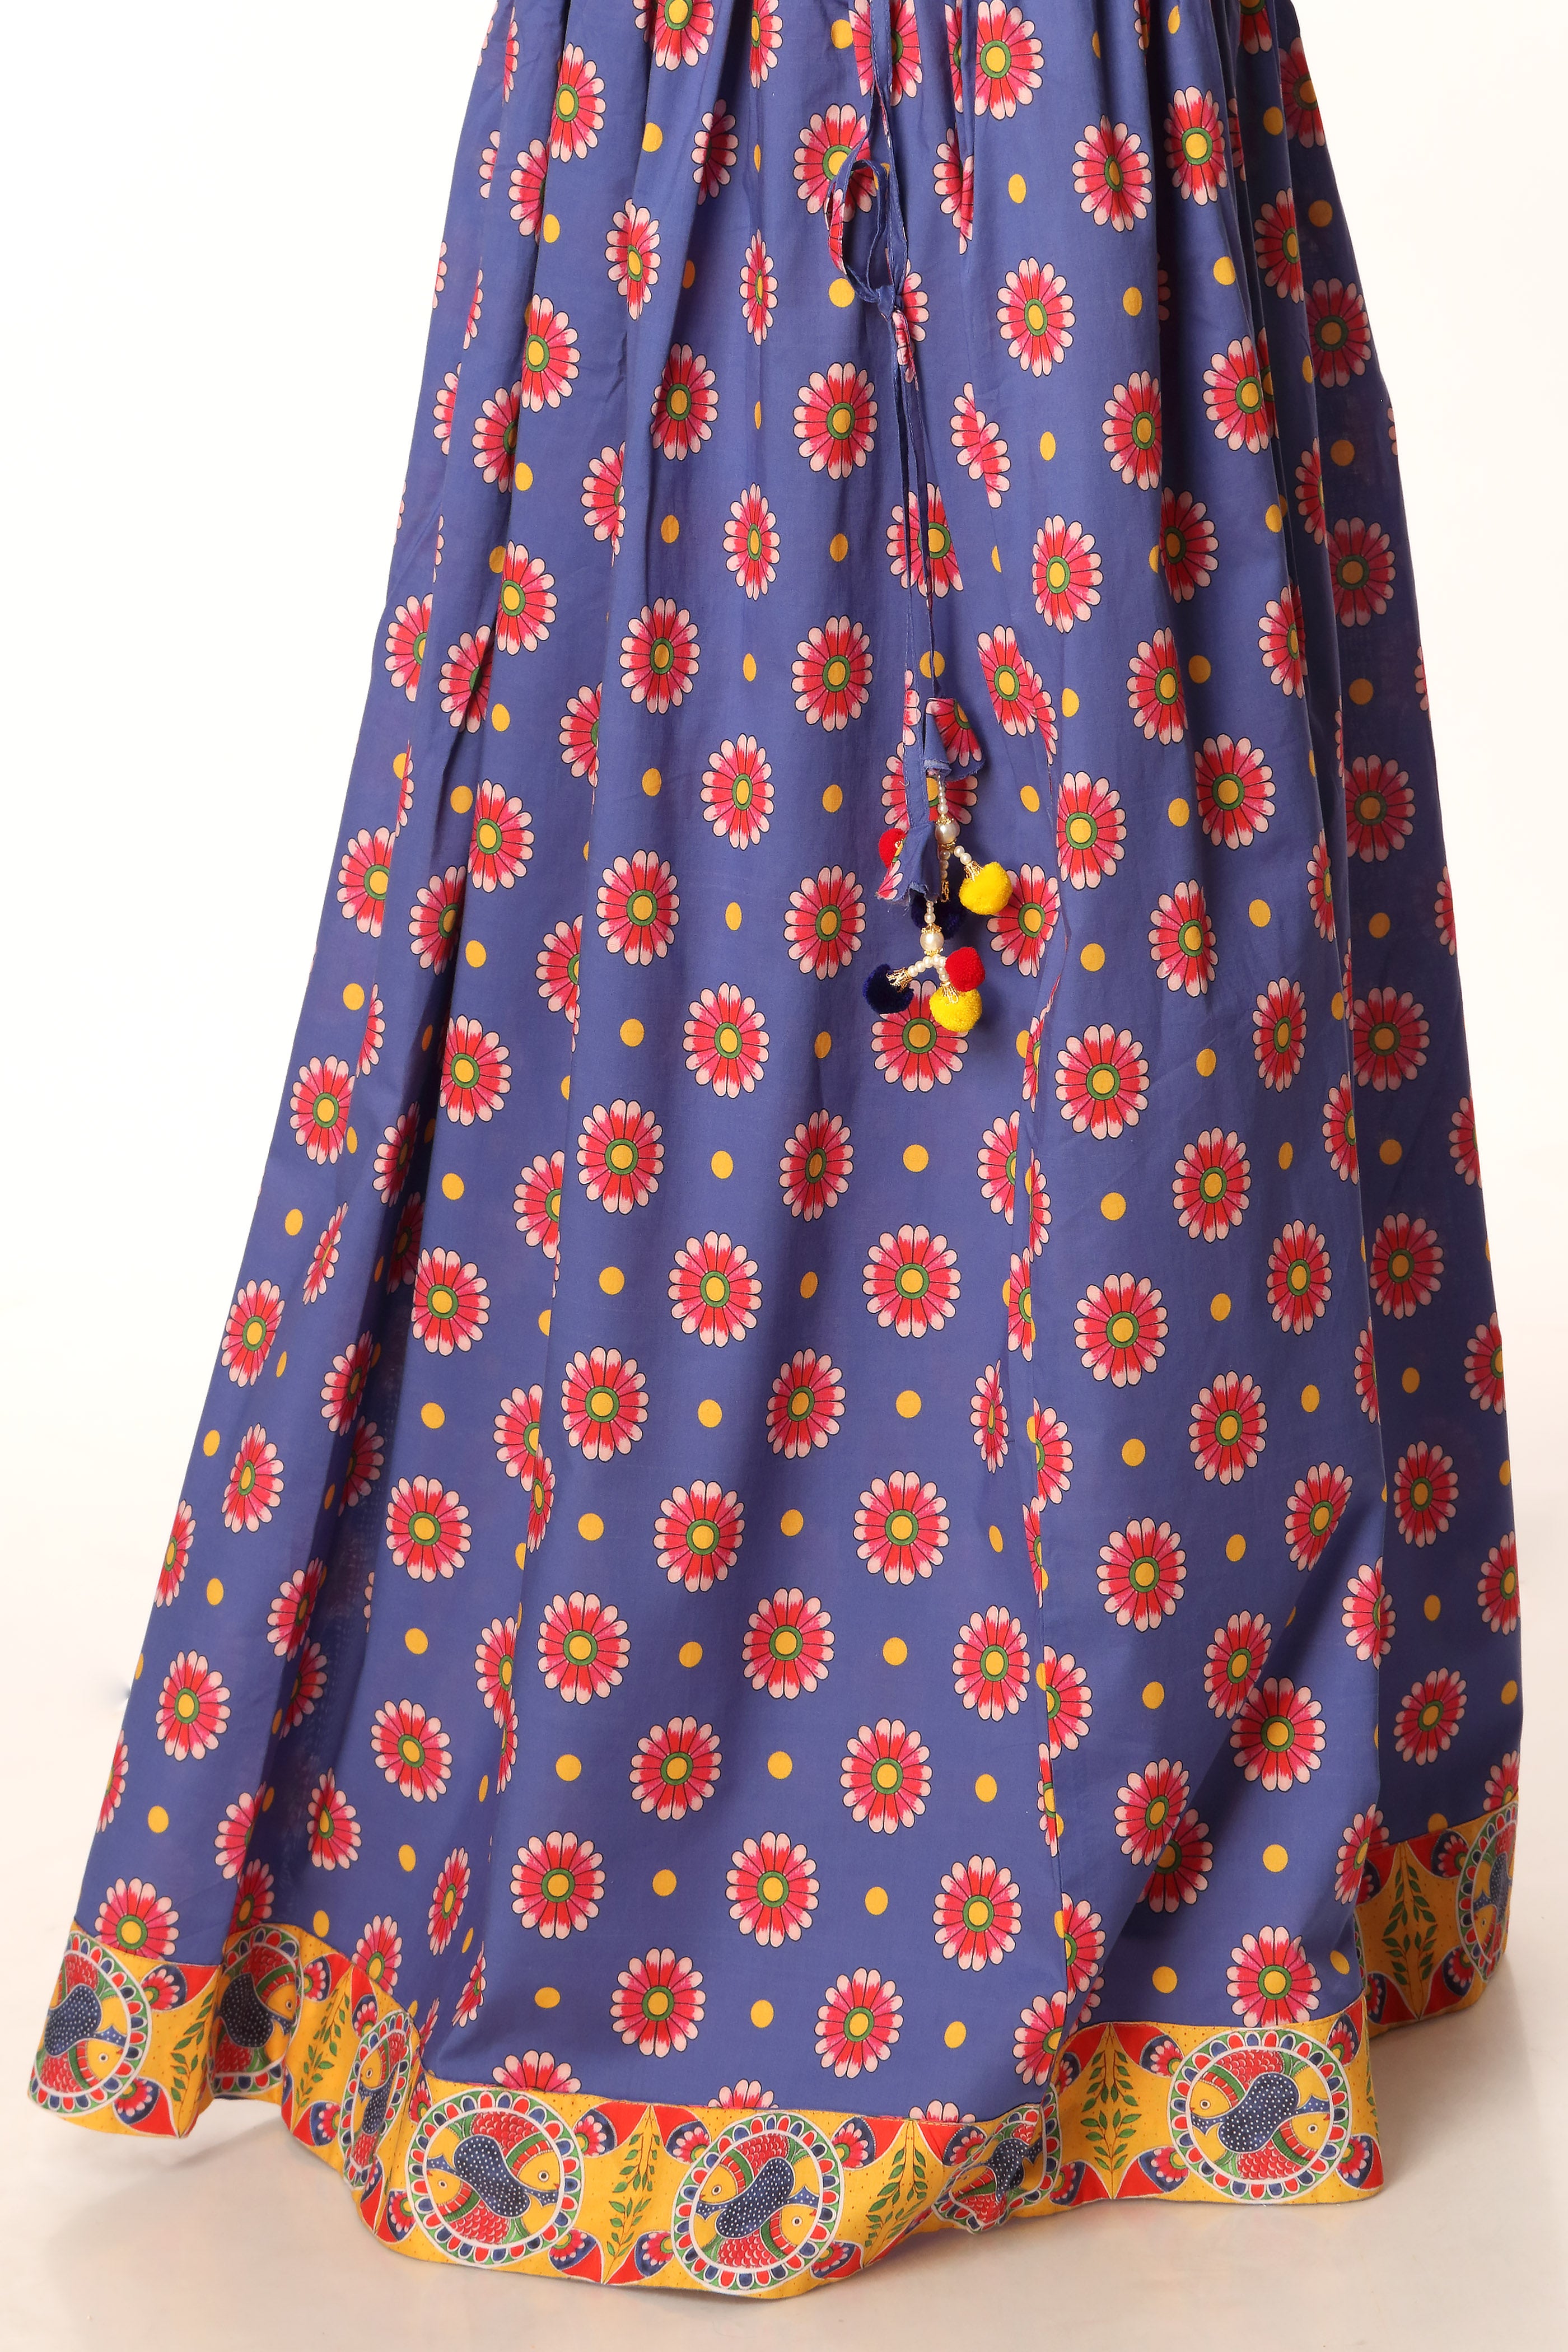 Ditsy Paisley in Multi coloured Printed Lawn fabric 3